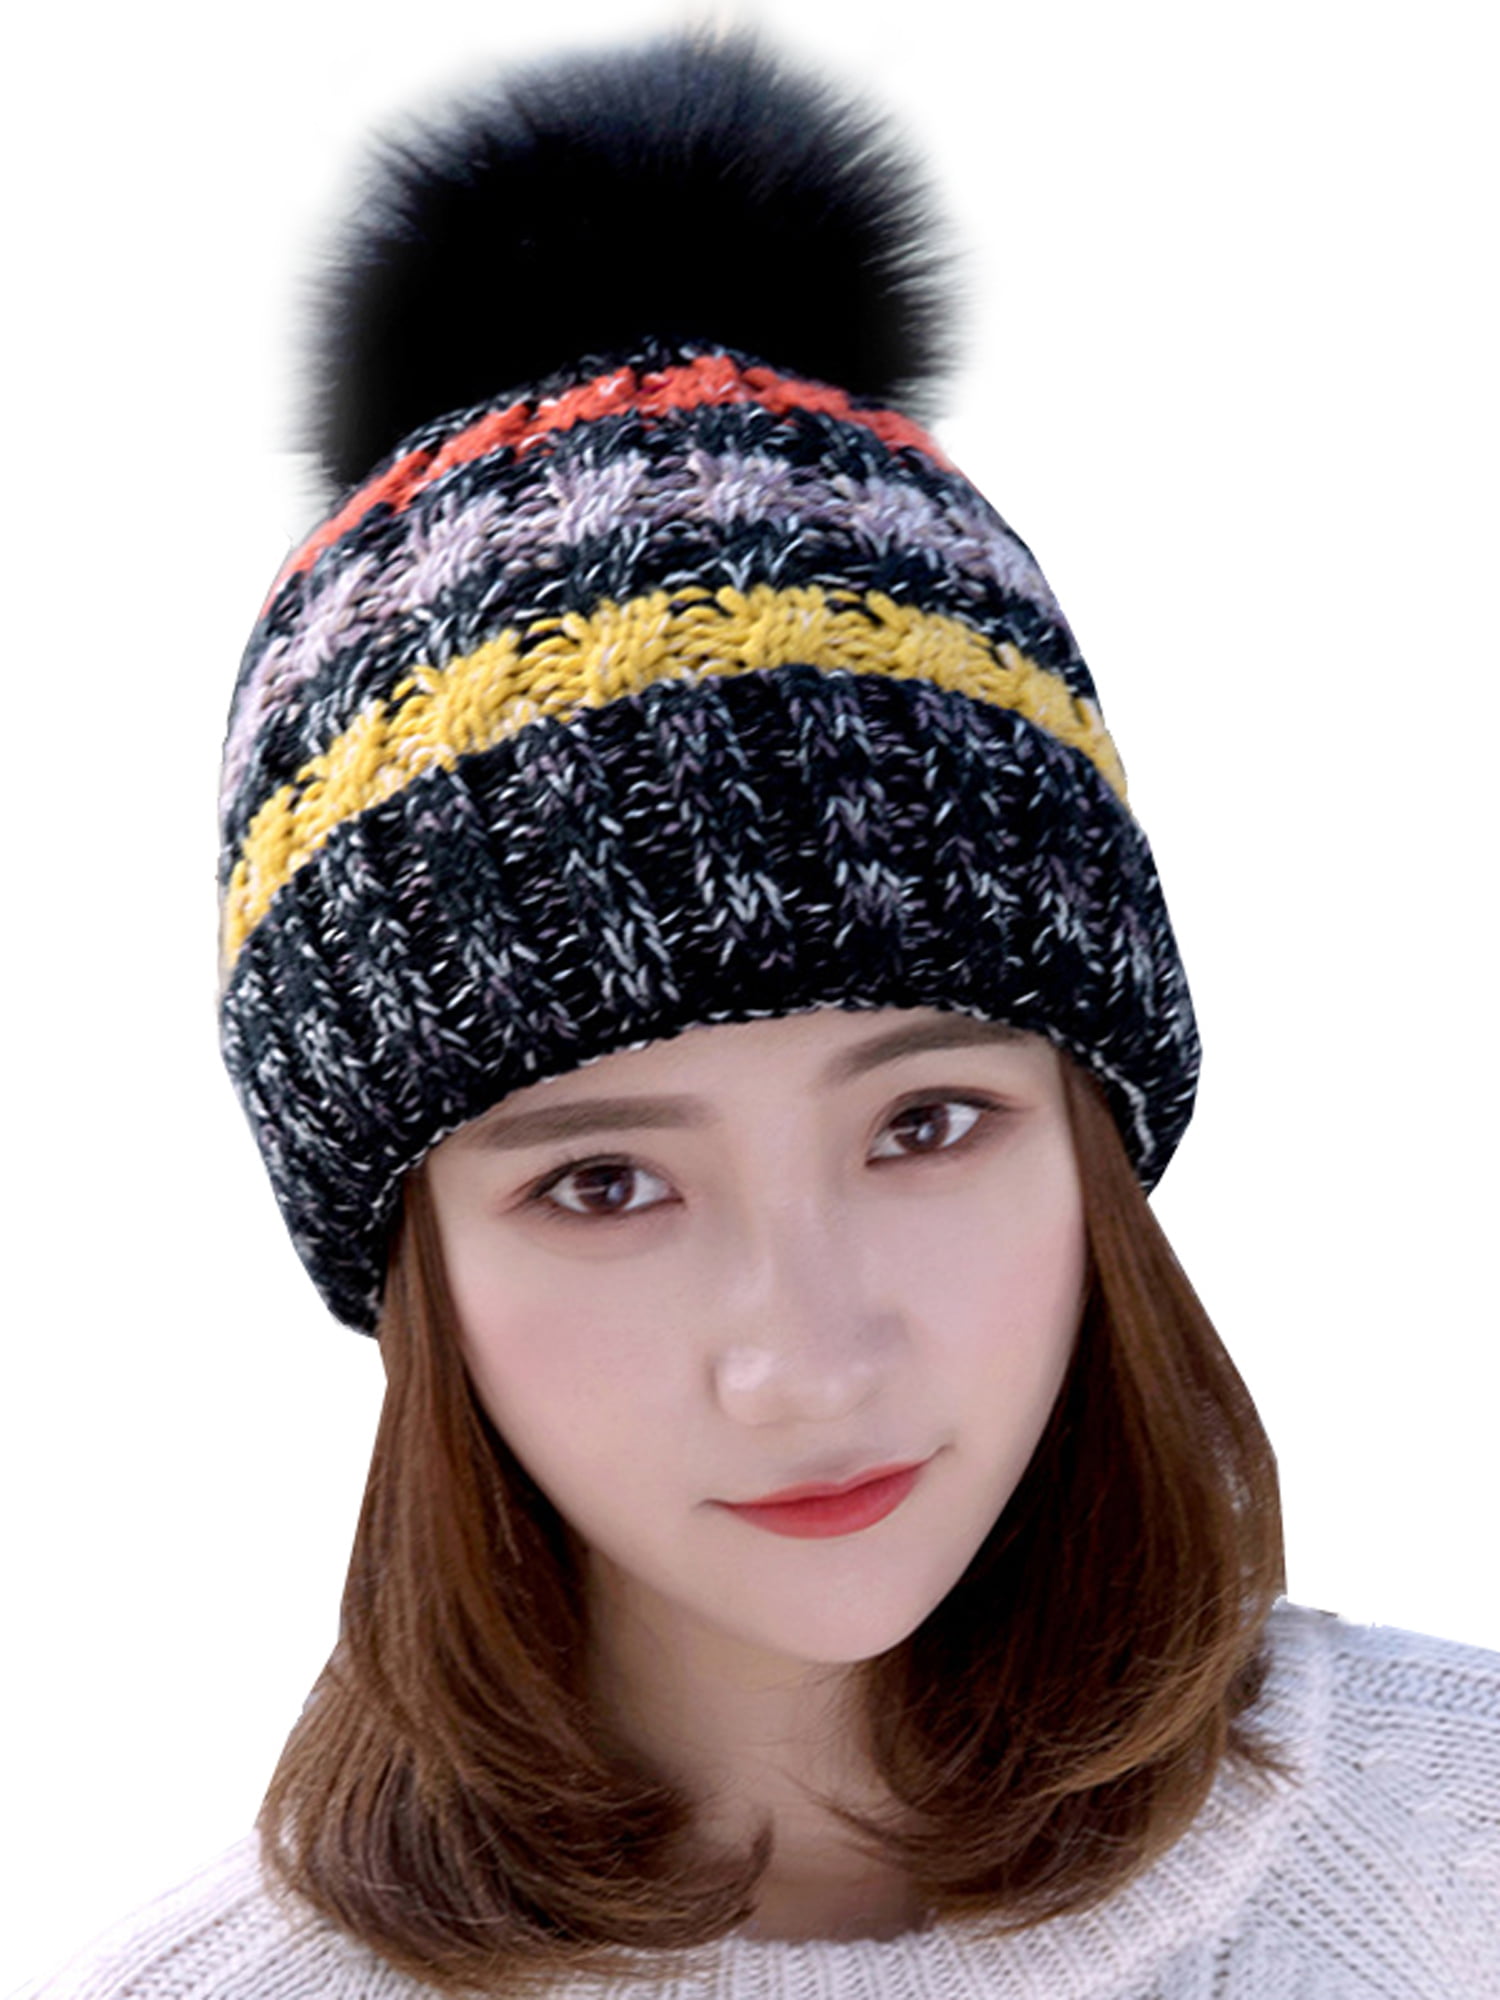 New Womens Warm Wool Cable Knitted Fur Pom Beanie Bobble Ski Hat Winter Cap 